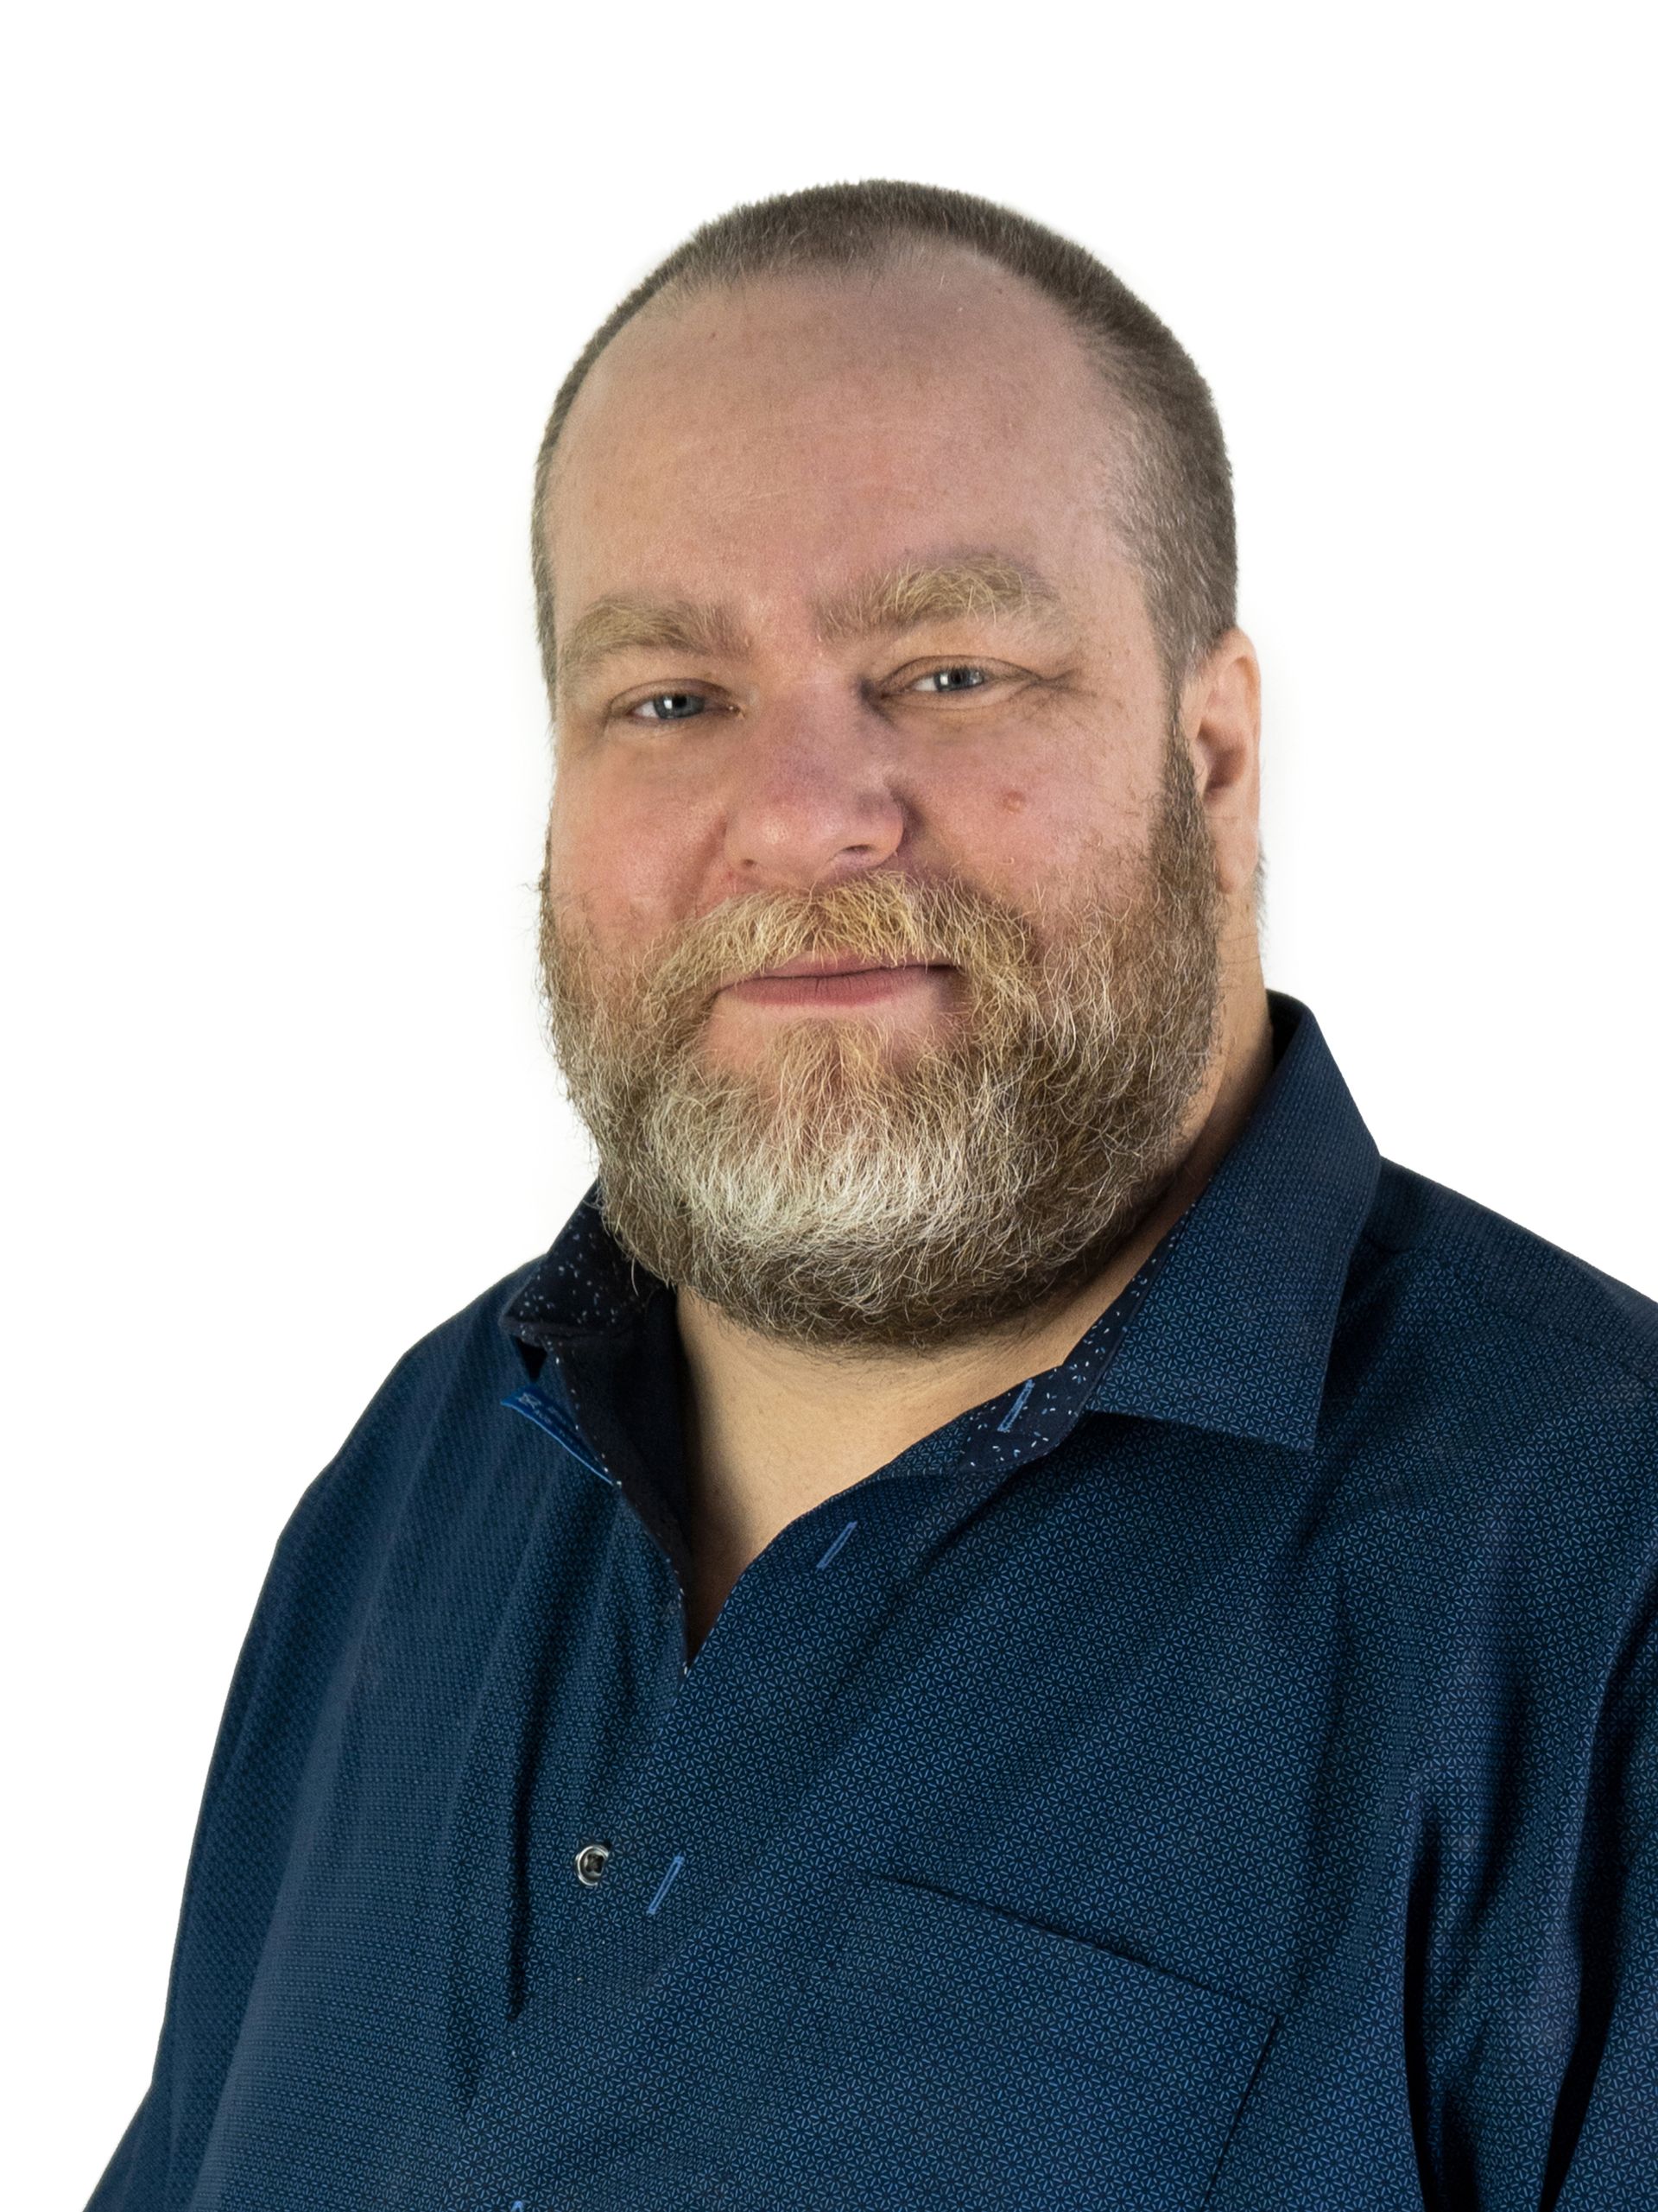 A photograph of Mathieu Paquette, a middle aged man with a kind face, full beard, and a shirt worn with its top three buttons undone.